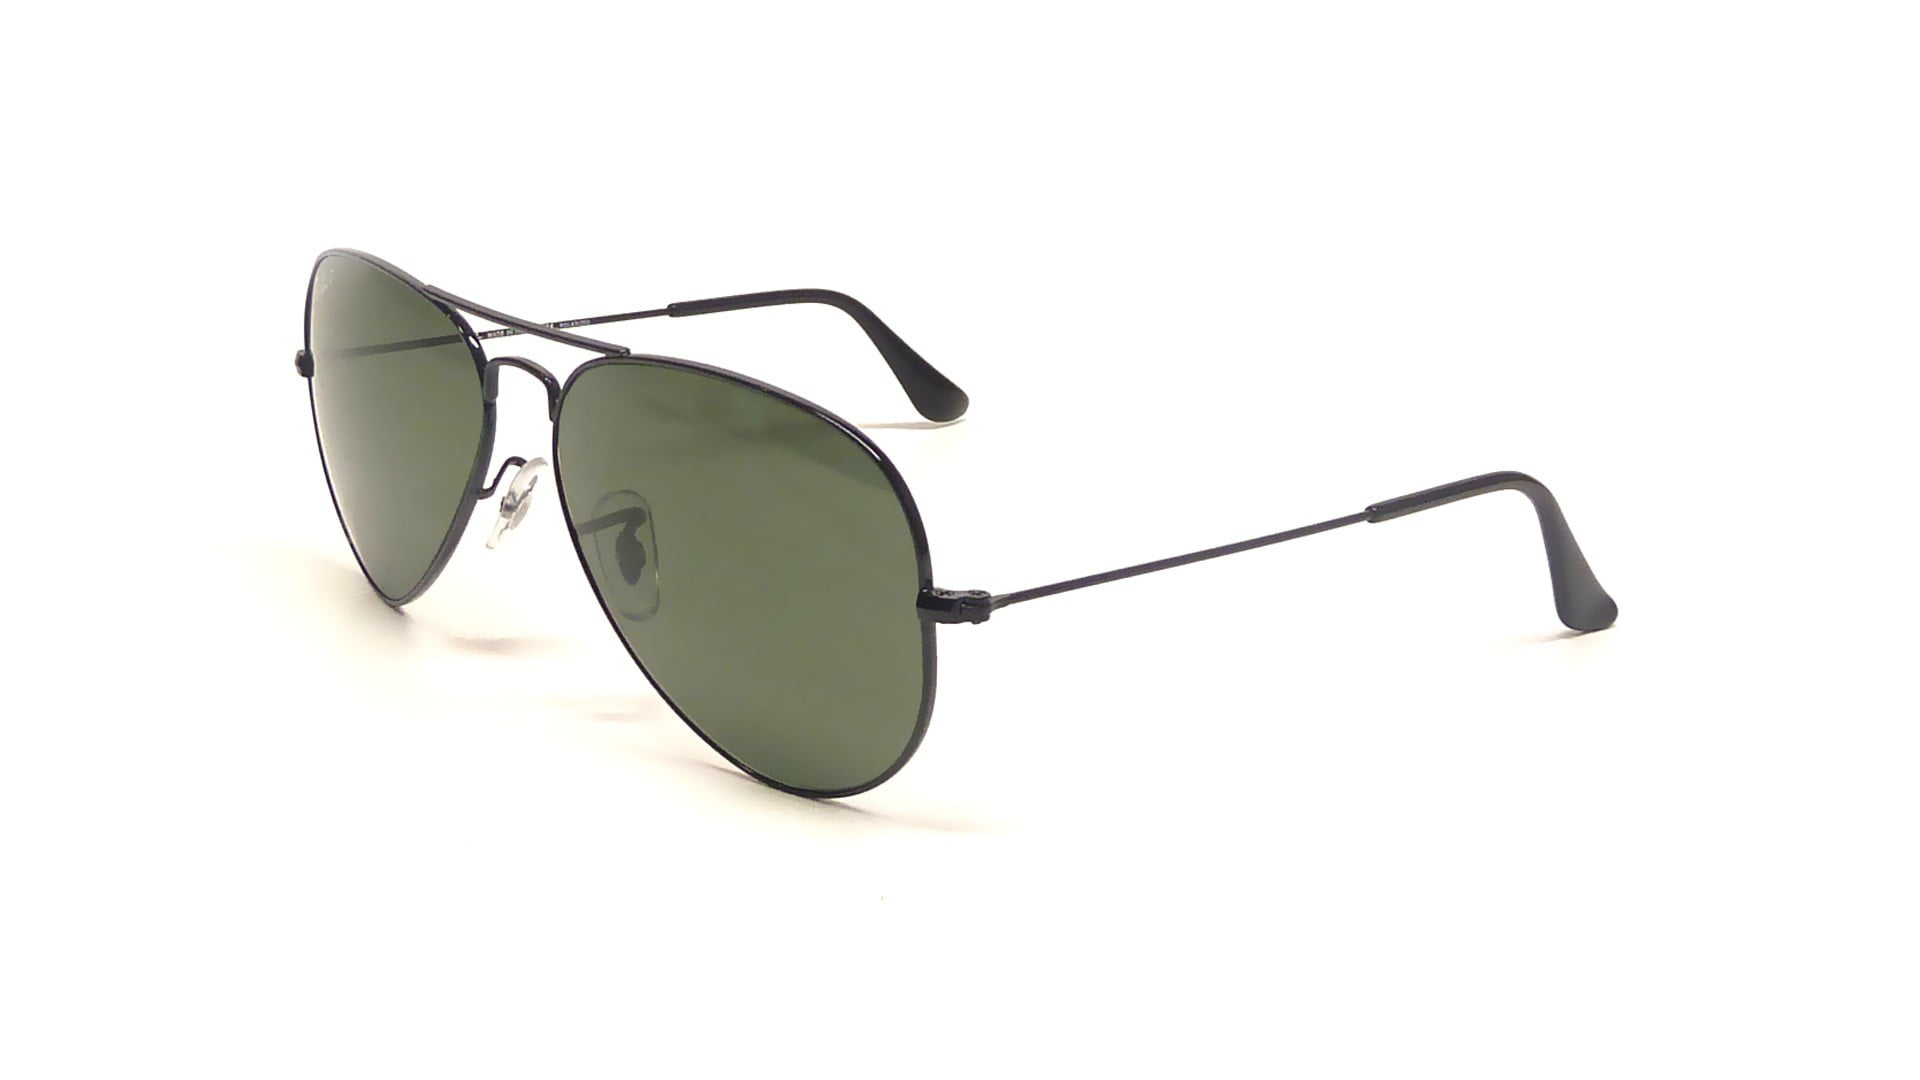 Ray-Ban 0RB3025 W0879 58 Gunmetal/Grey Green Aviator Large Metal Icons  Sunglasses - Bundled Item with Cleaning Kit 